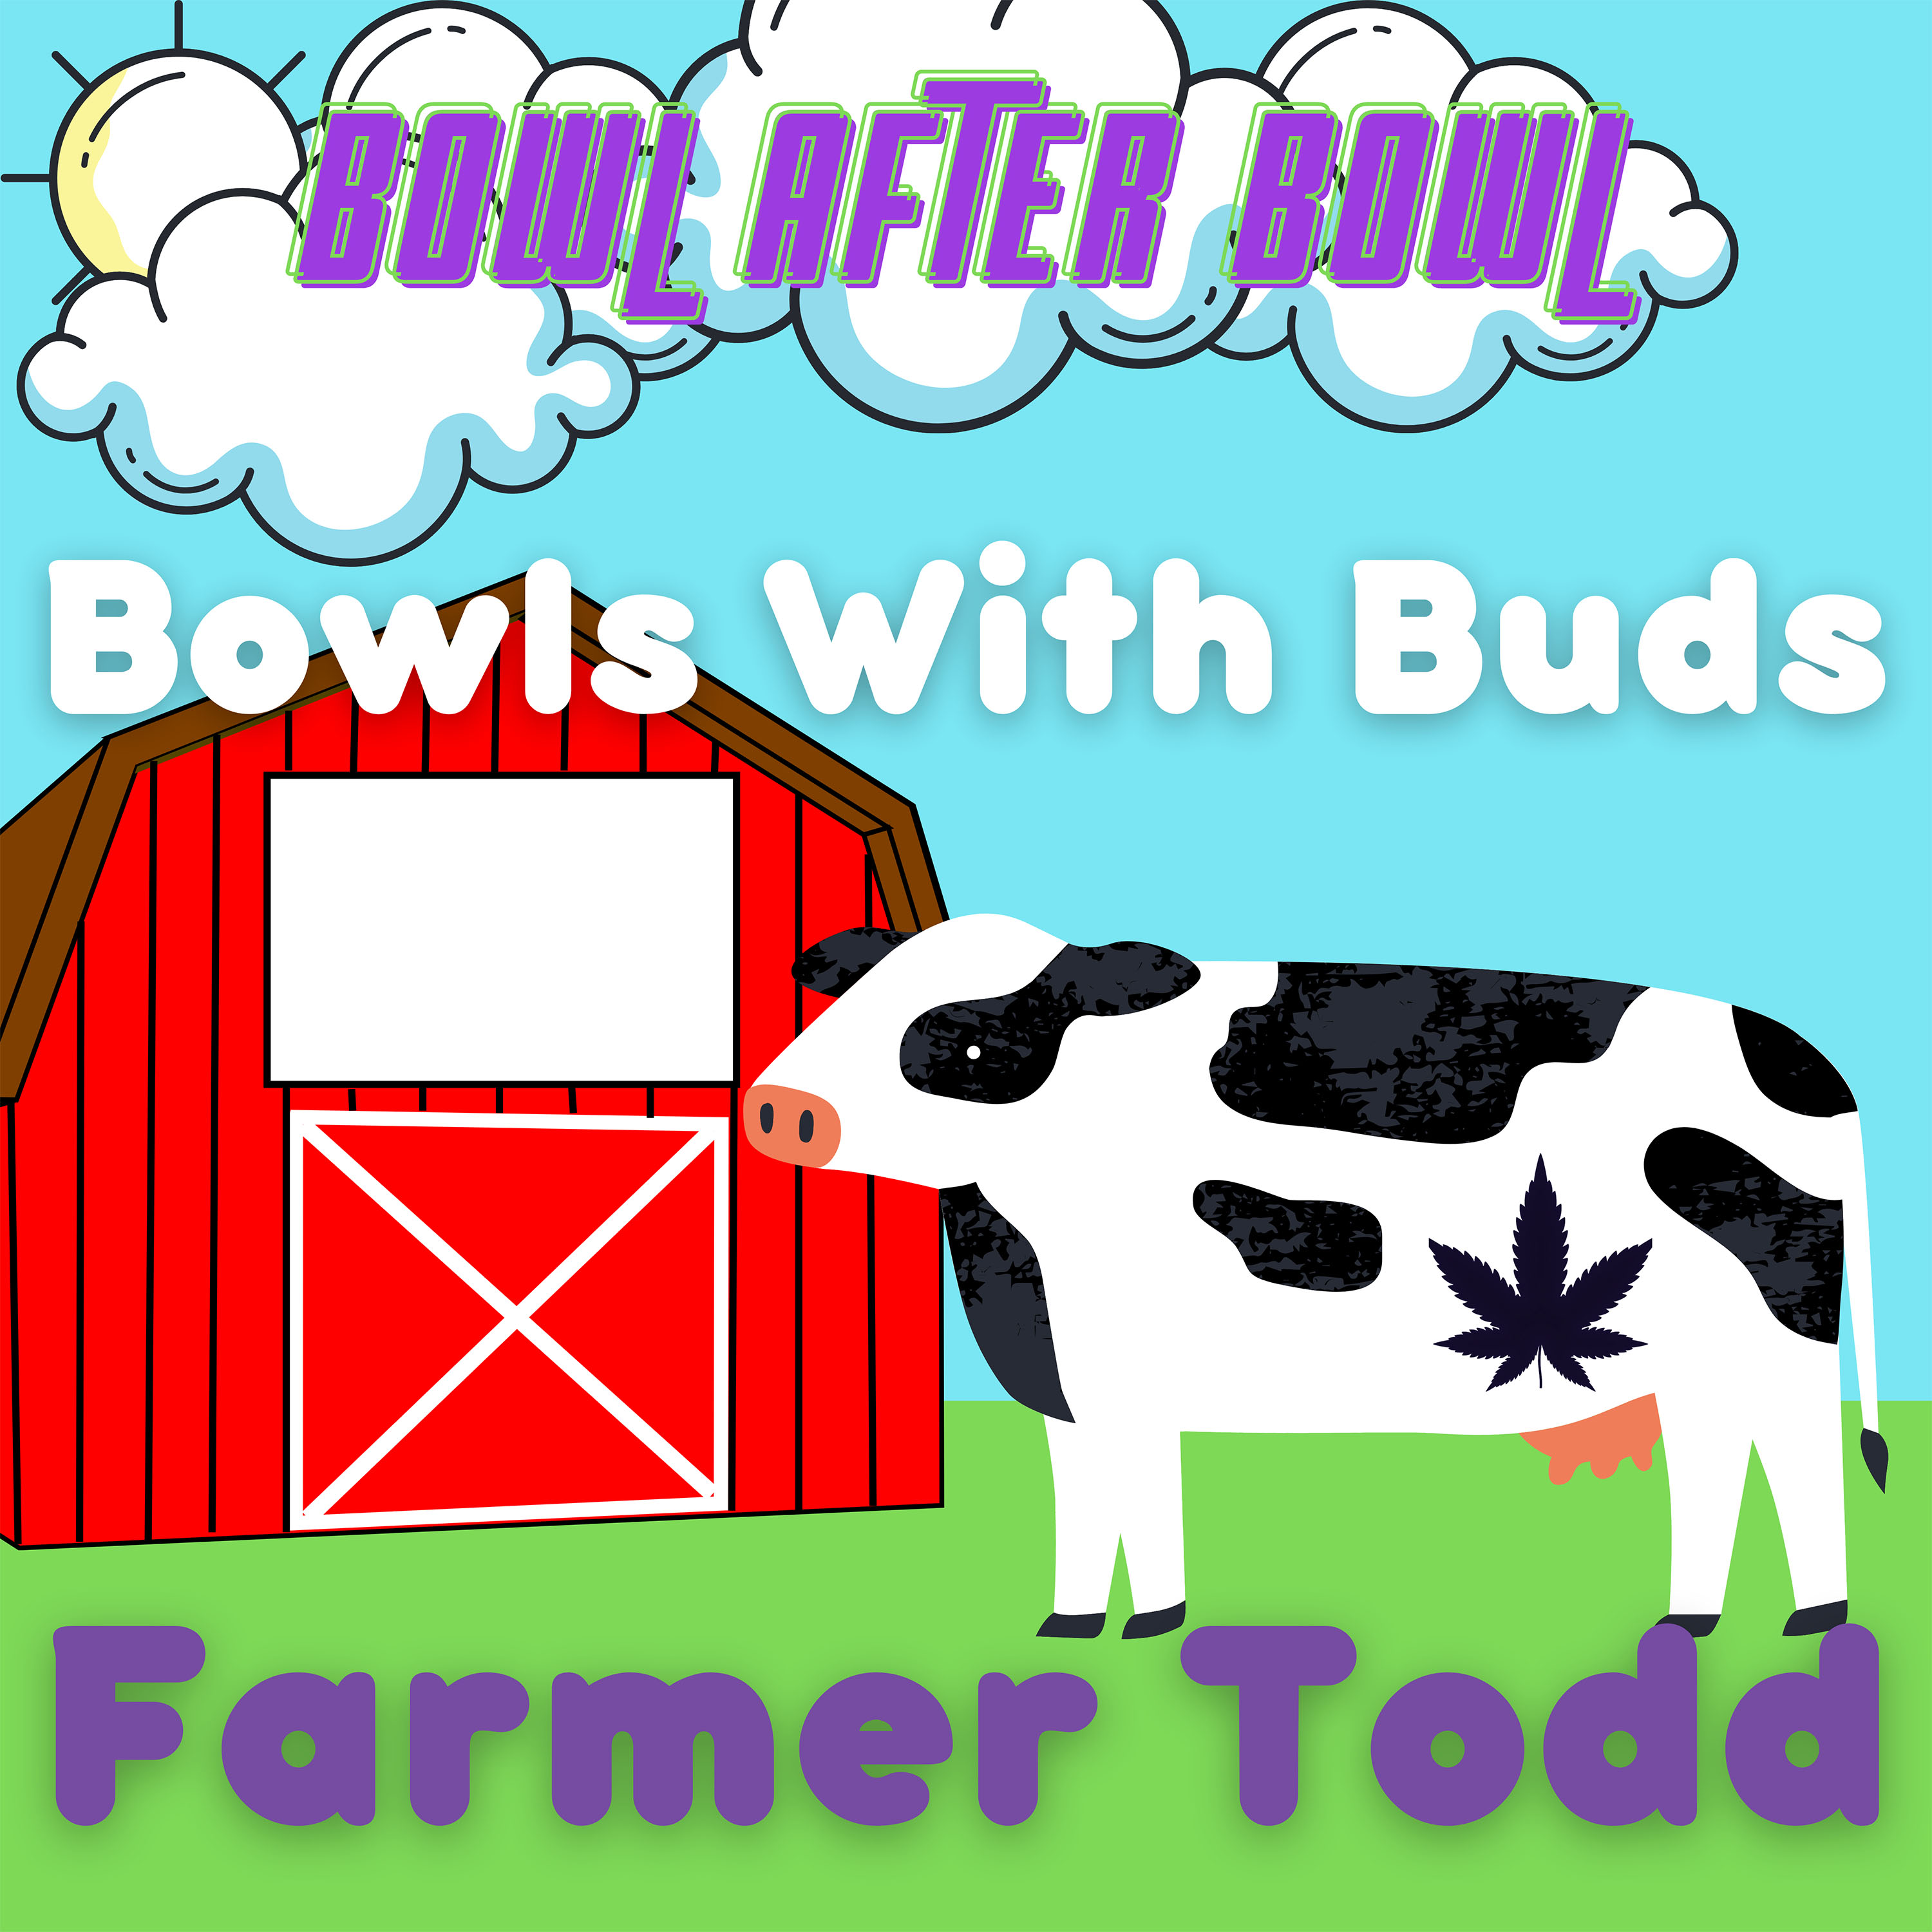 Episode 144 ★ Bowls With Buds ★ Farmer Todd